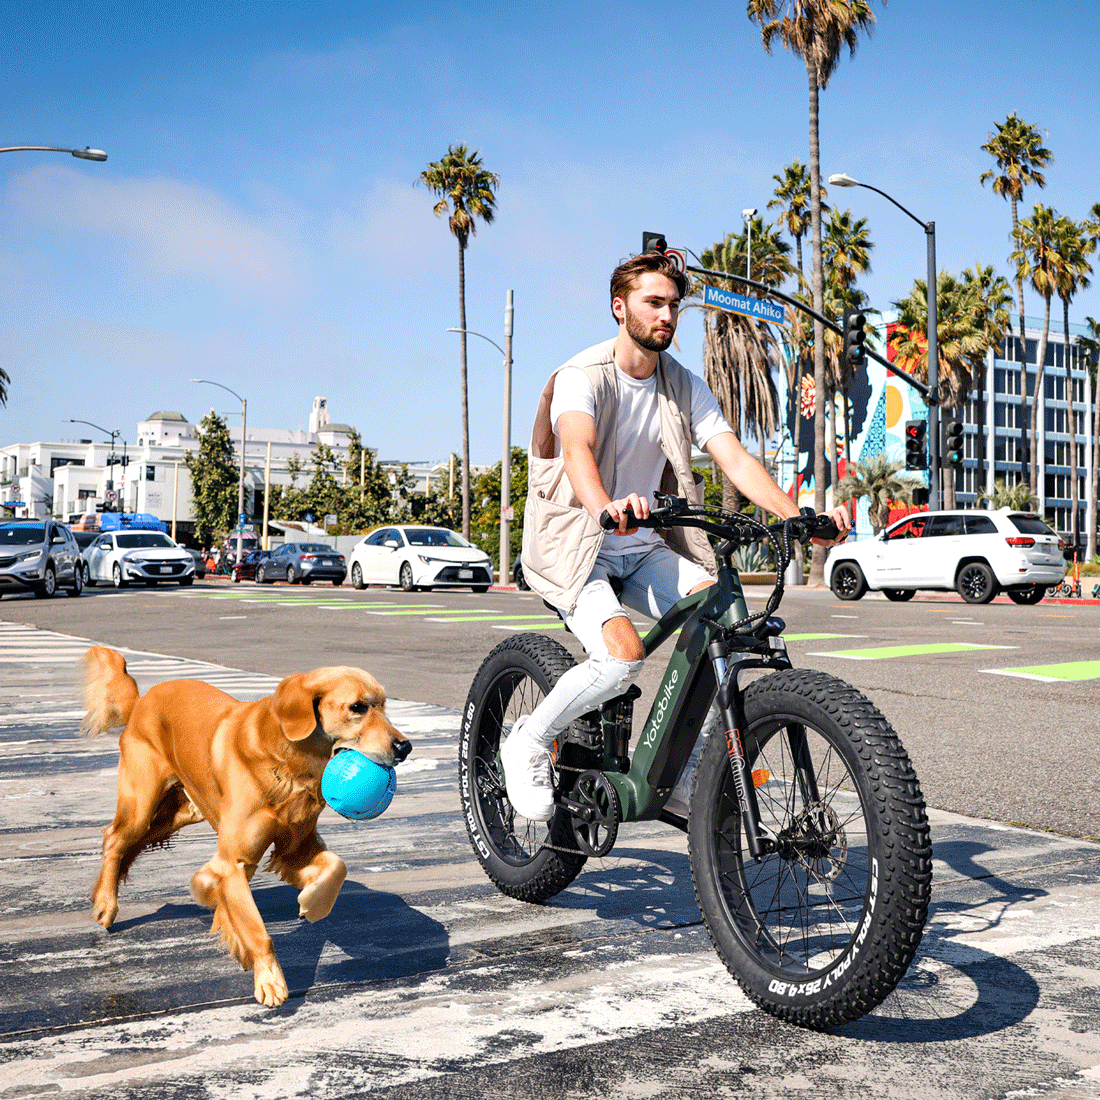 commuter-electric-road-bike-with-dog-on-street